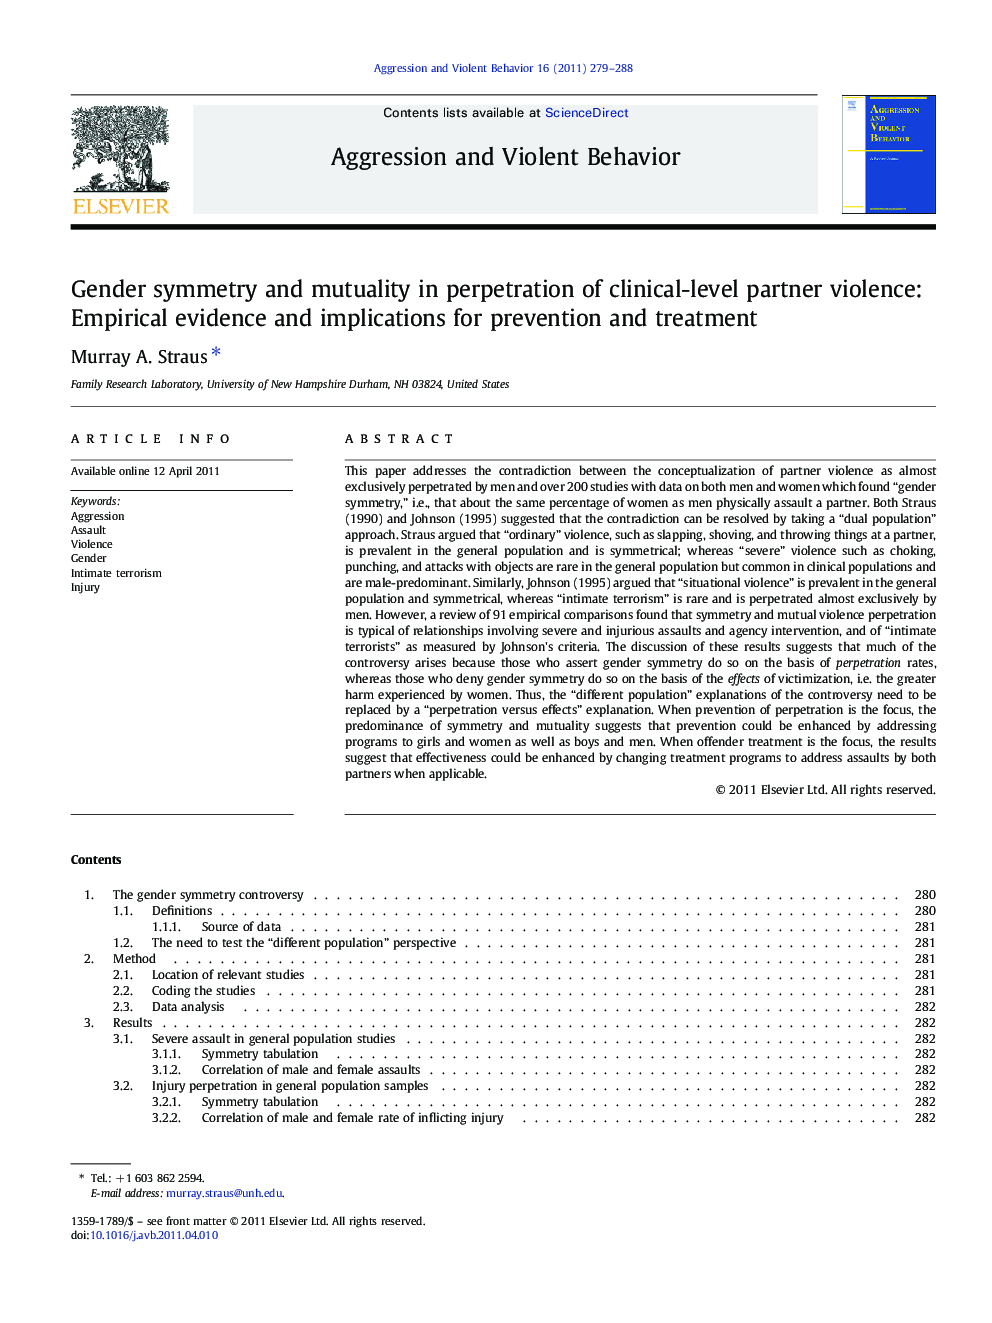 Gender symmetry and mutuality in perpetration of clinical-level partner violence: Empirical evidence and implications for prevention and treatment